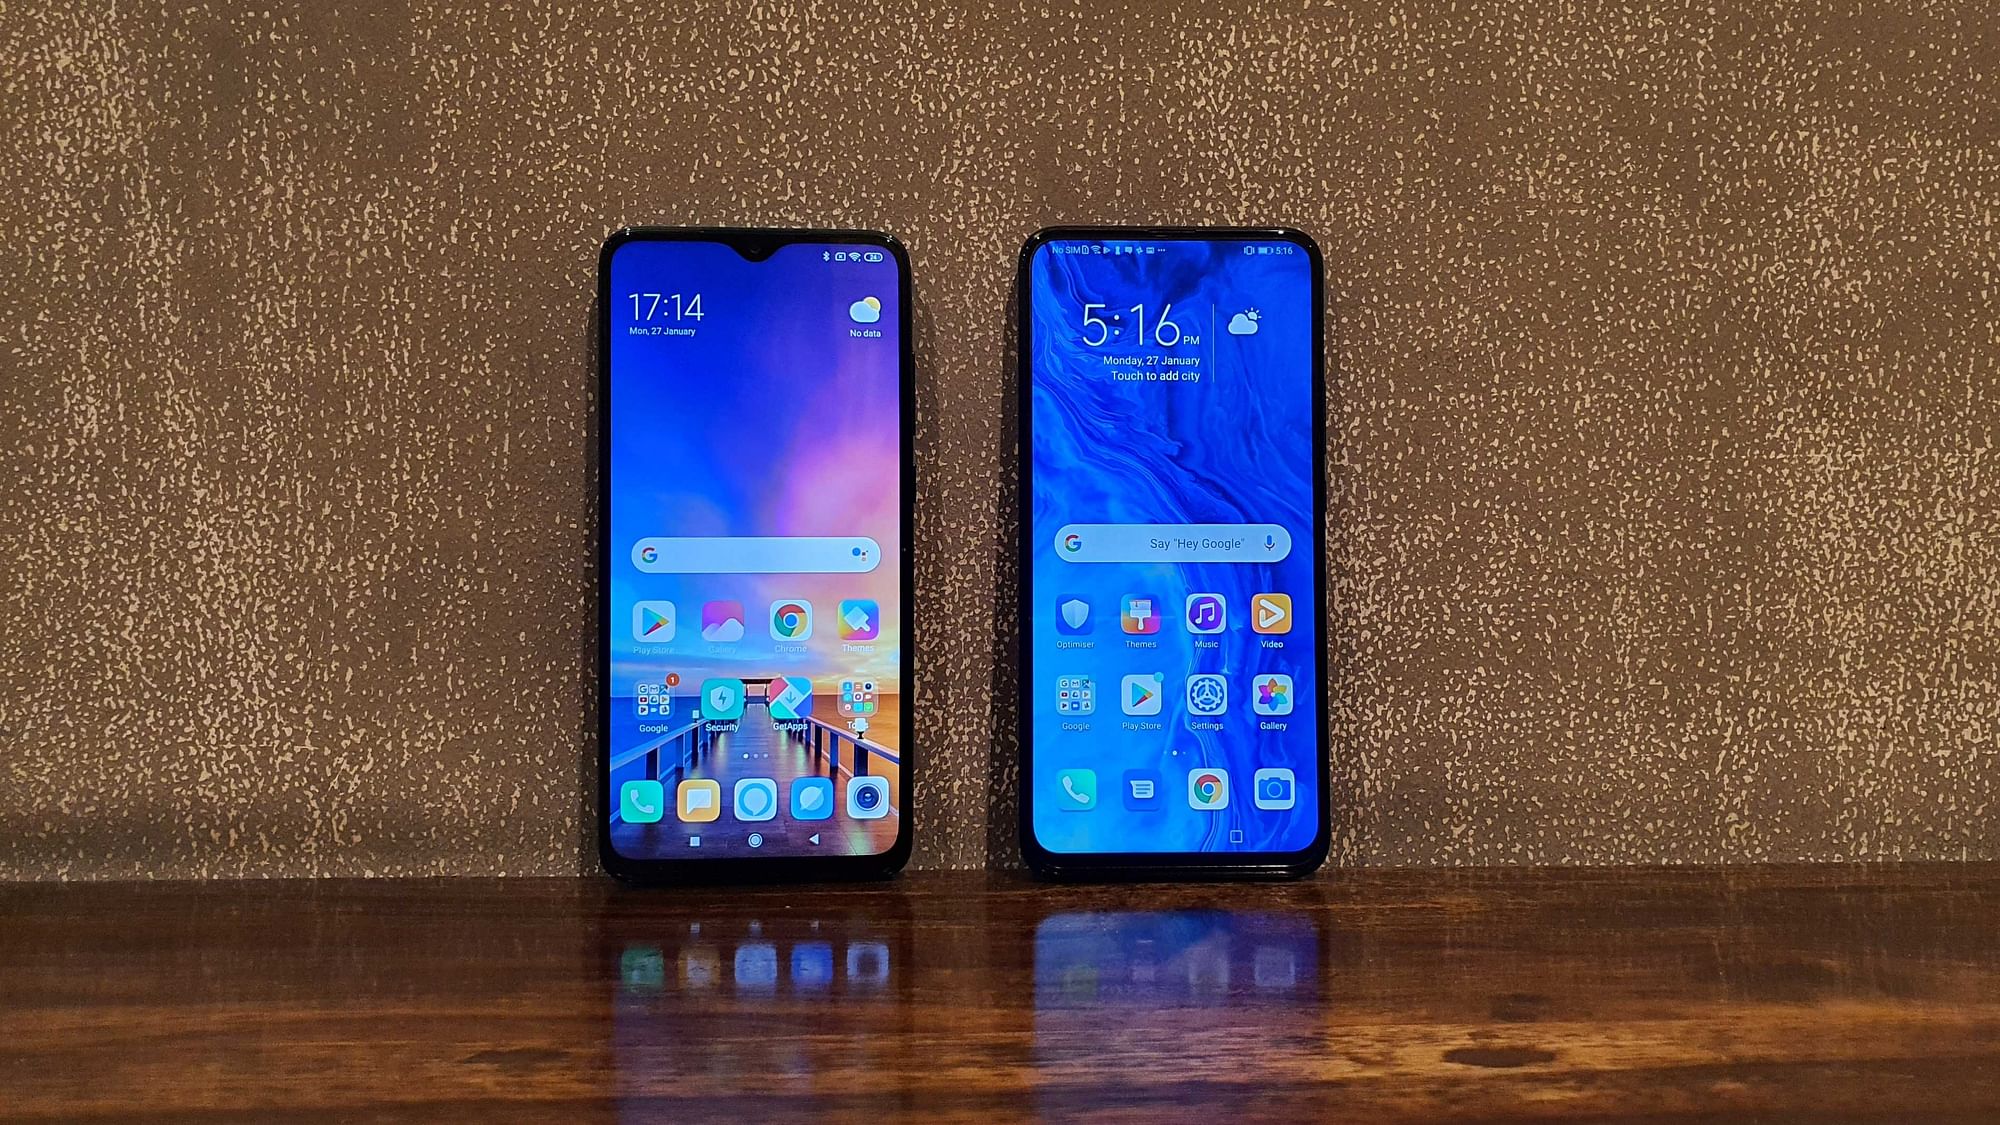 The Redmi Note 8 (left) comes with a water drop notch while the Honor 9x (right) offers a full view display.